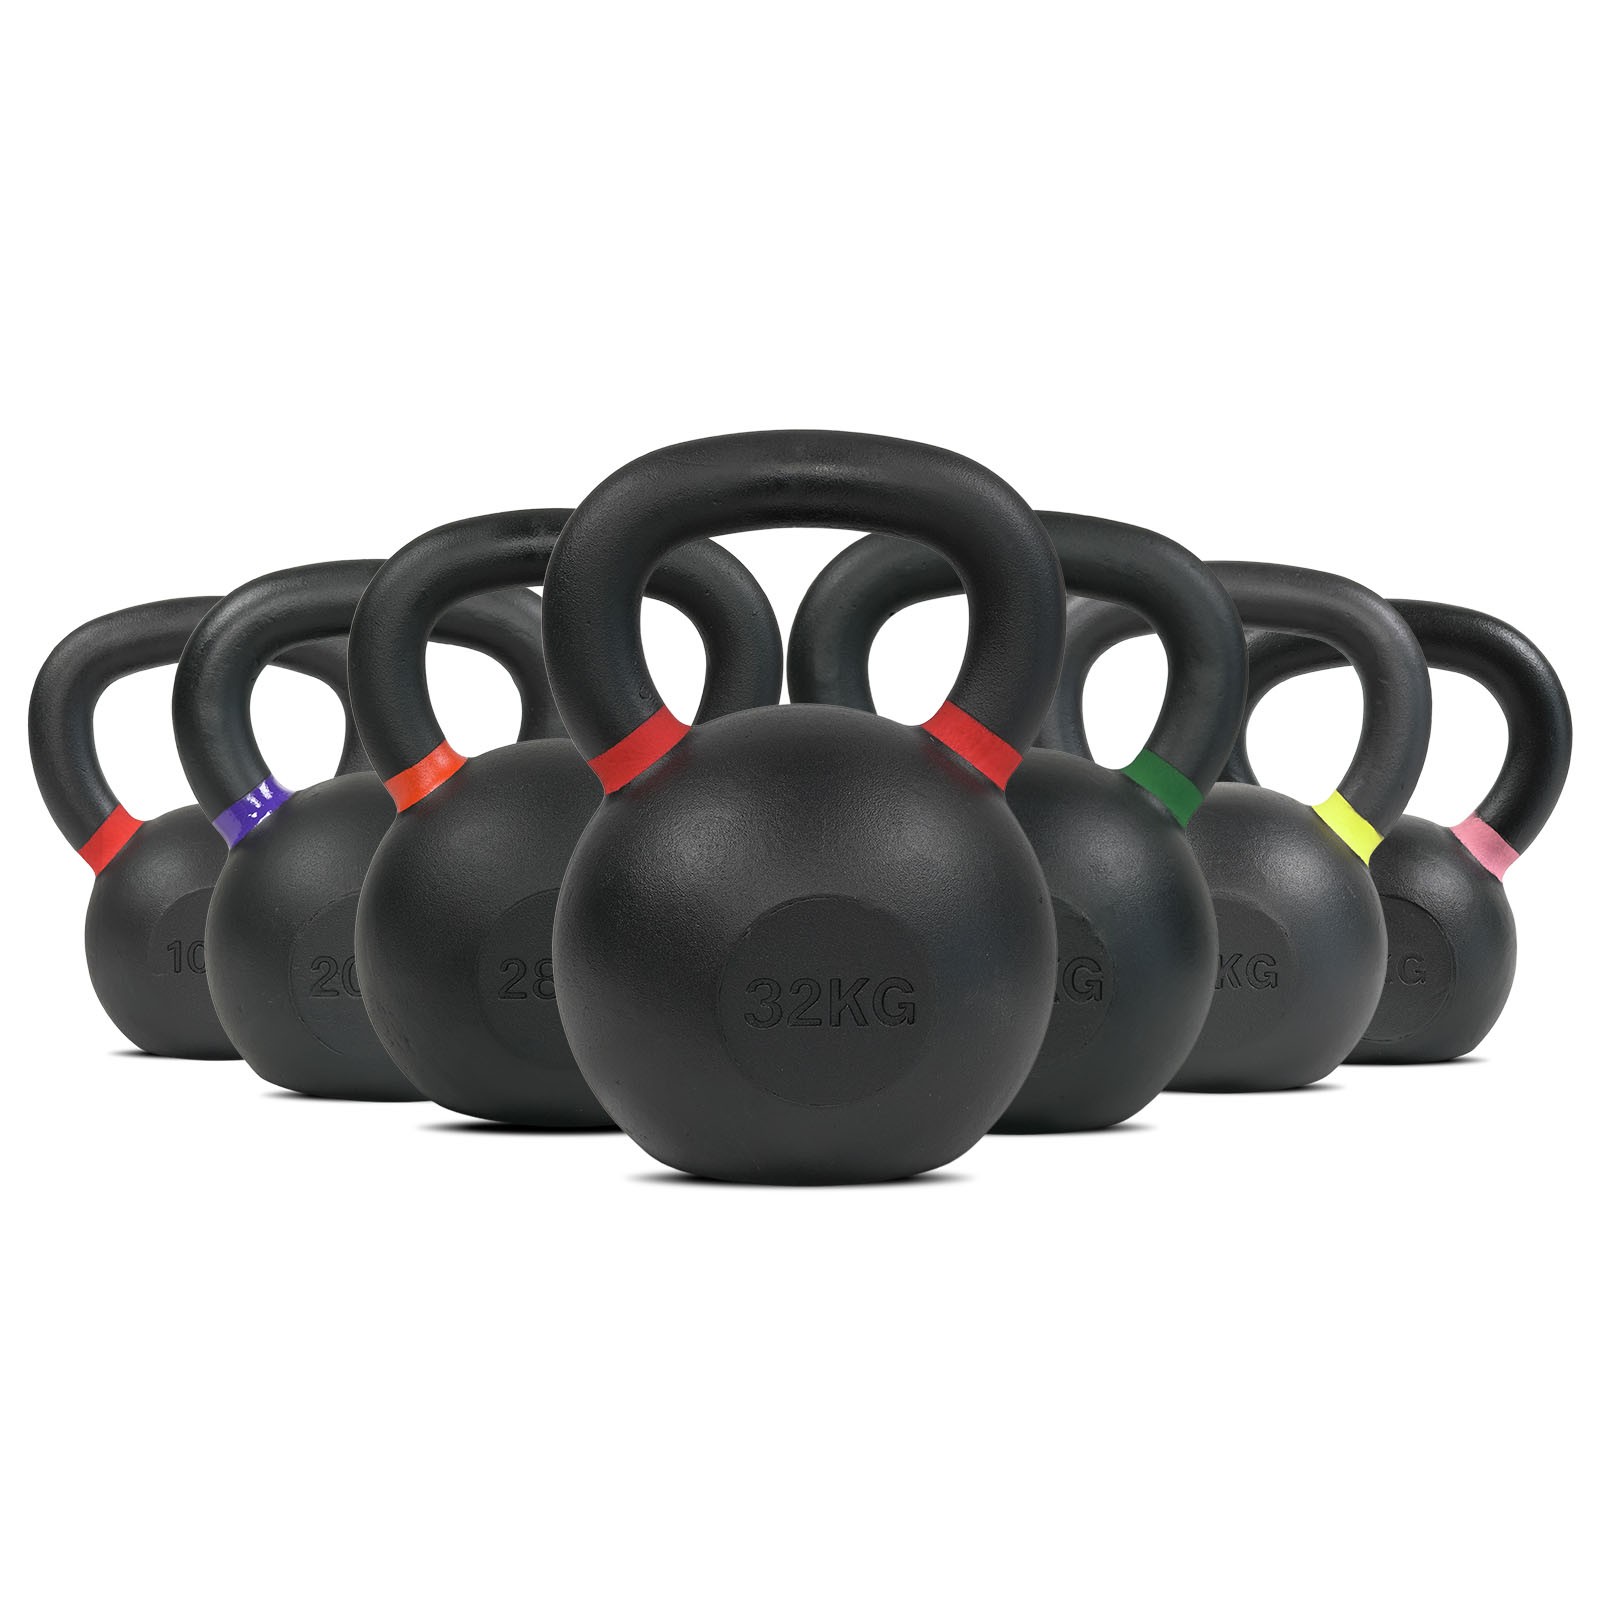 Kettlebell Weight - Available in multiple weight sizes - Chiro Shopping